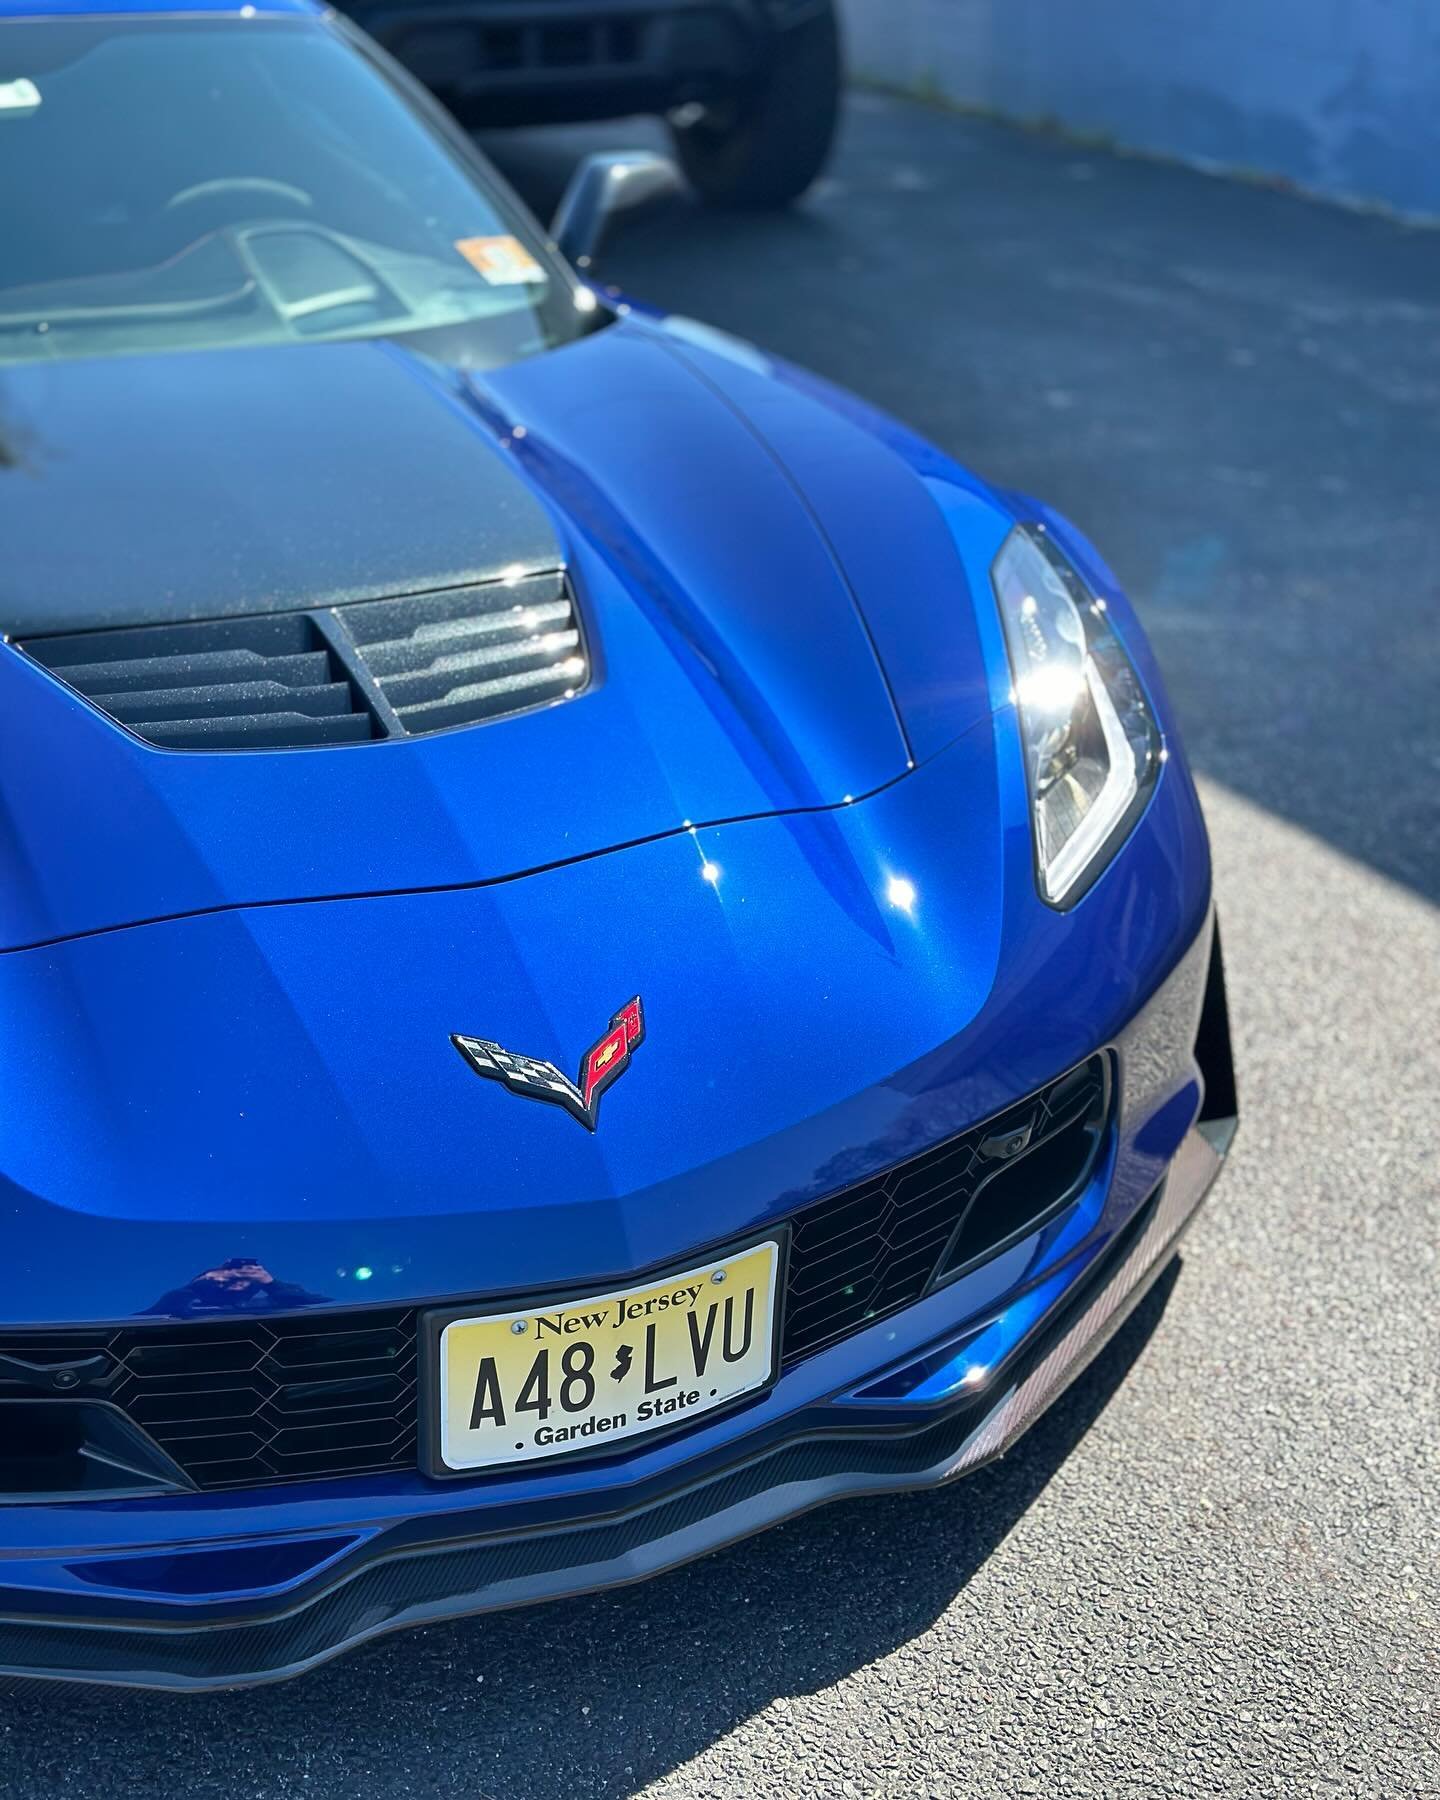 Protect Your Investment &trade;️

This 2017 Corvette Z06 packs a punch and sounds just as good. This customer came in for a full paint correction and ceramic coating, as they frequently visit car shows and events that showcase what they worked so har